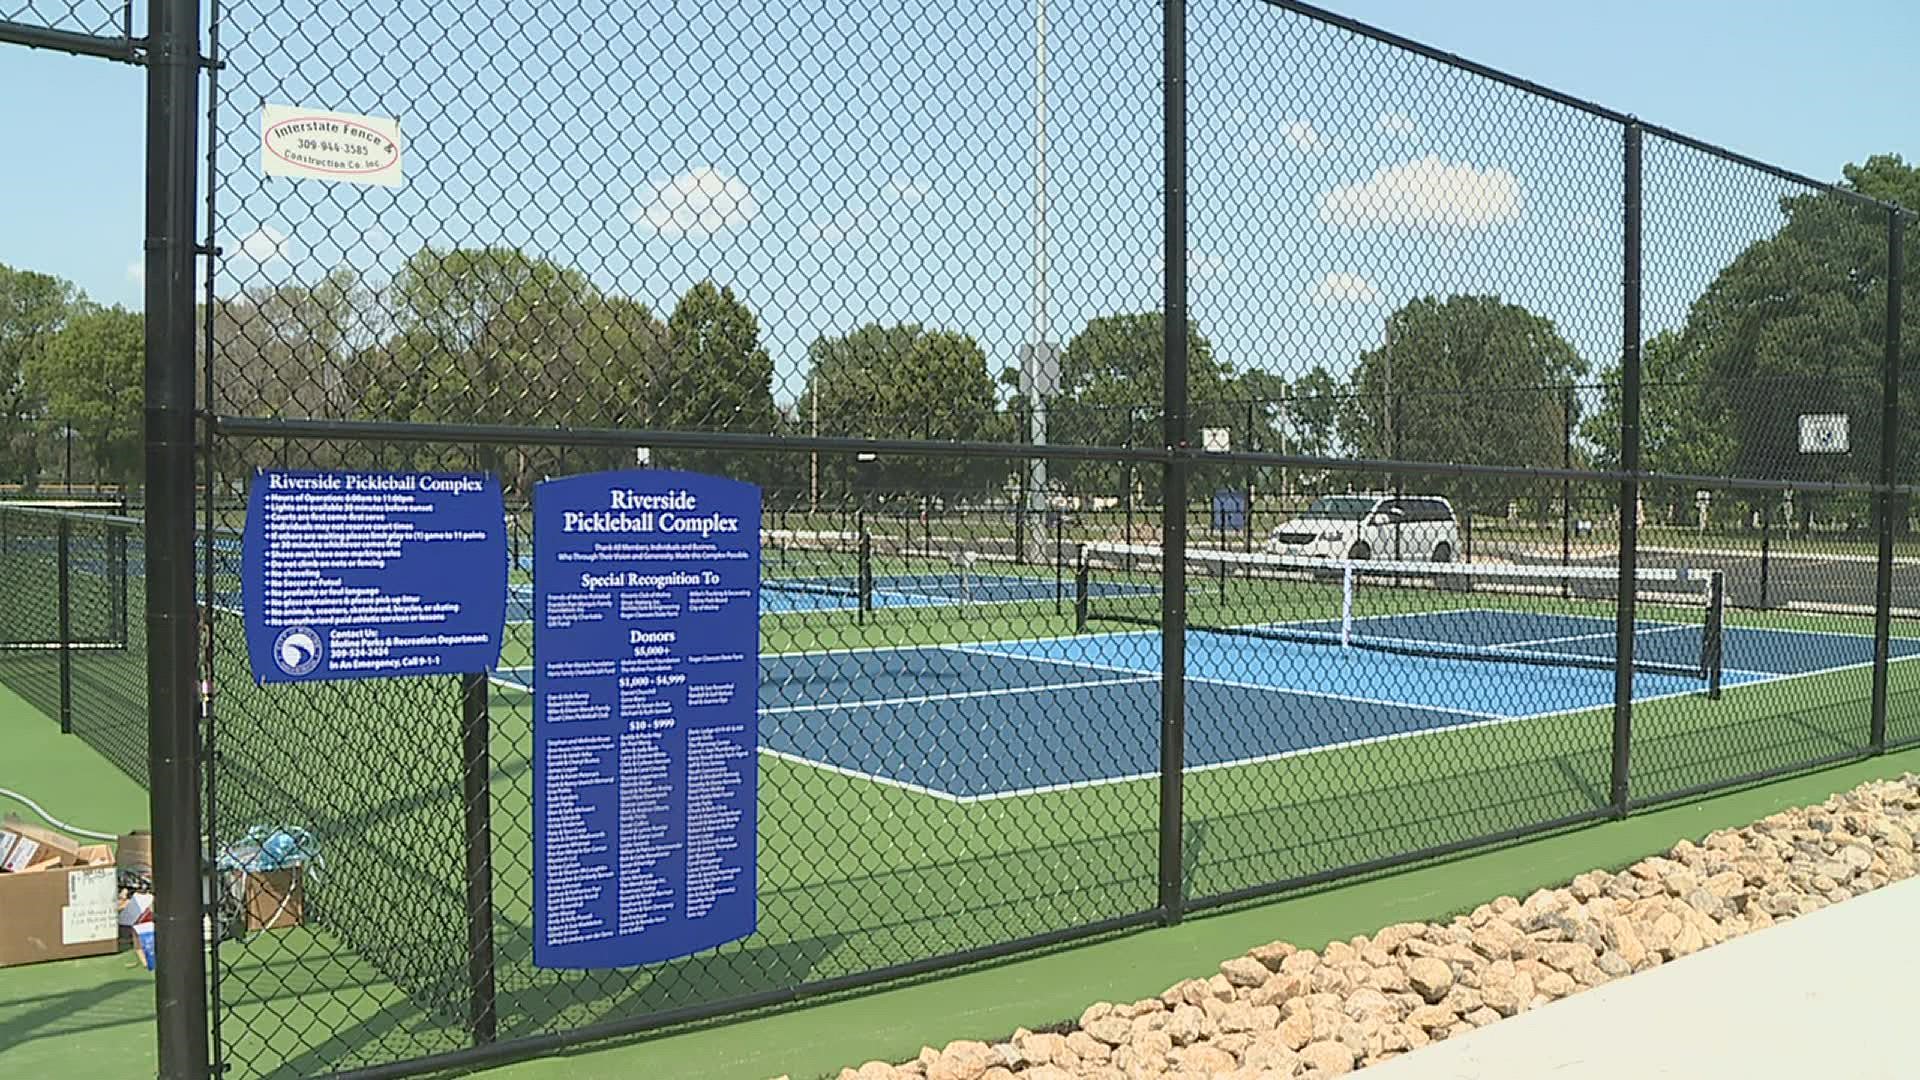 Over the last few years, pickleball has been rising in popularity, becoming one of the fastest growing sports in the U.S.